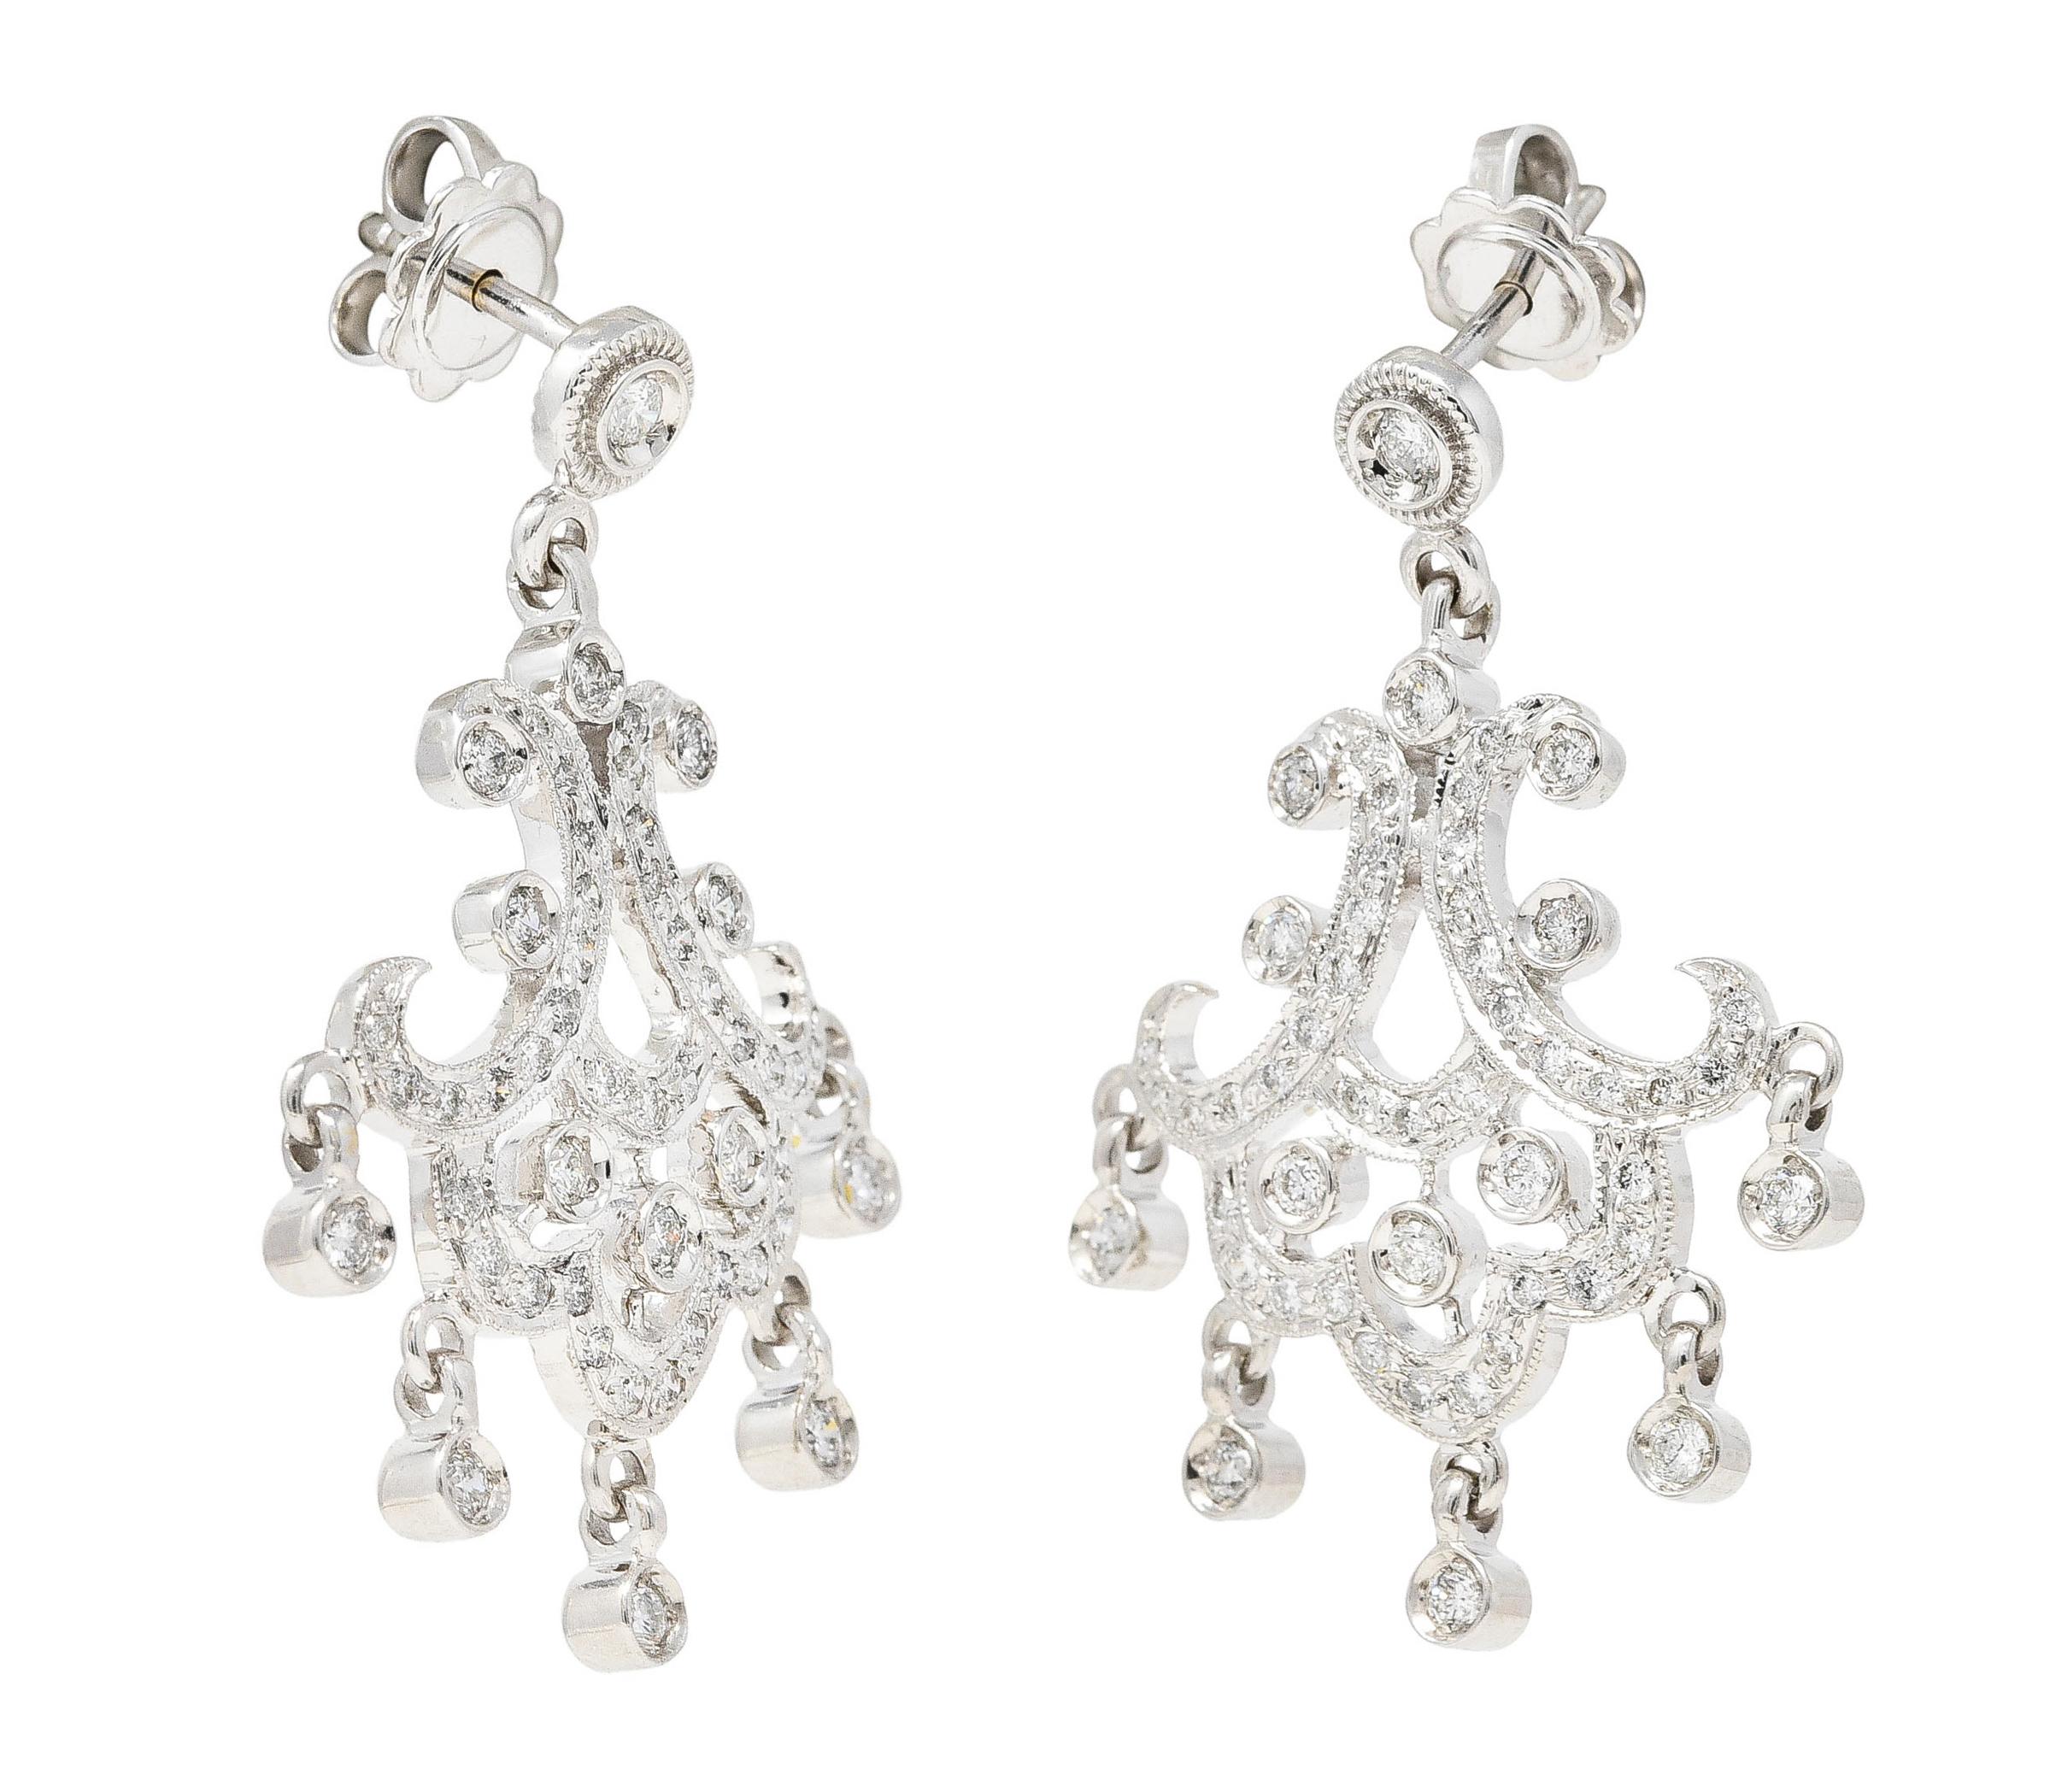 Contemporary 1.50 Carats Diamond 18 Karat White Gold Chandelier Earrings In Excellent Condition For Sale In Philadelphia, PA